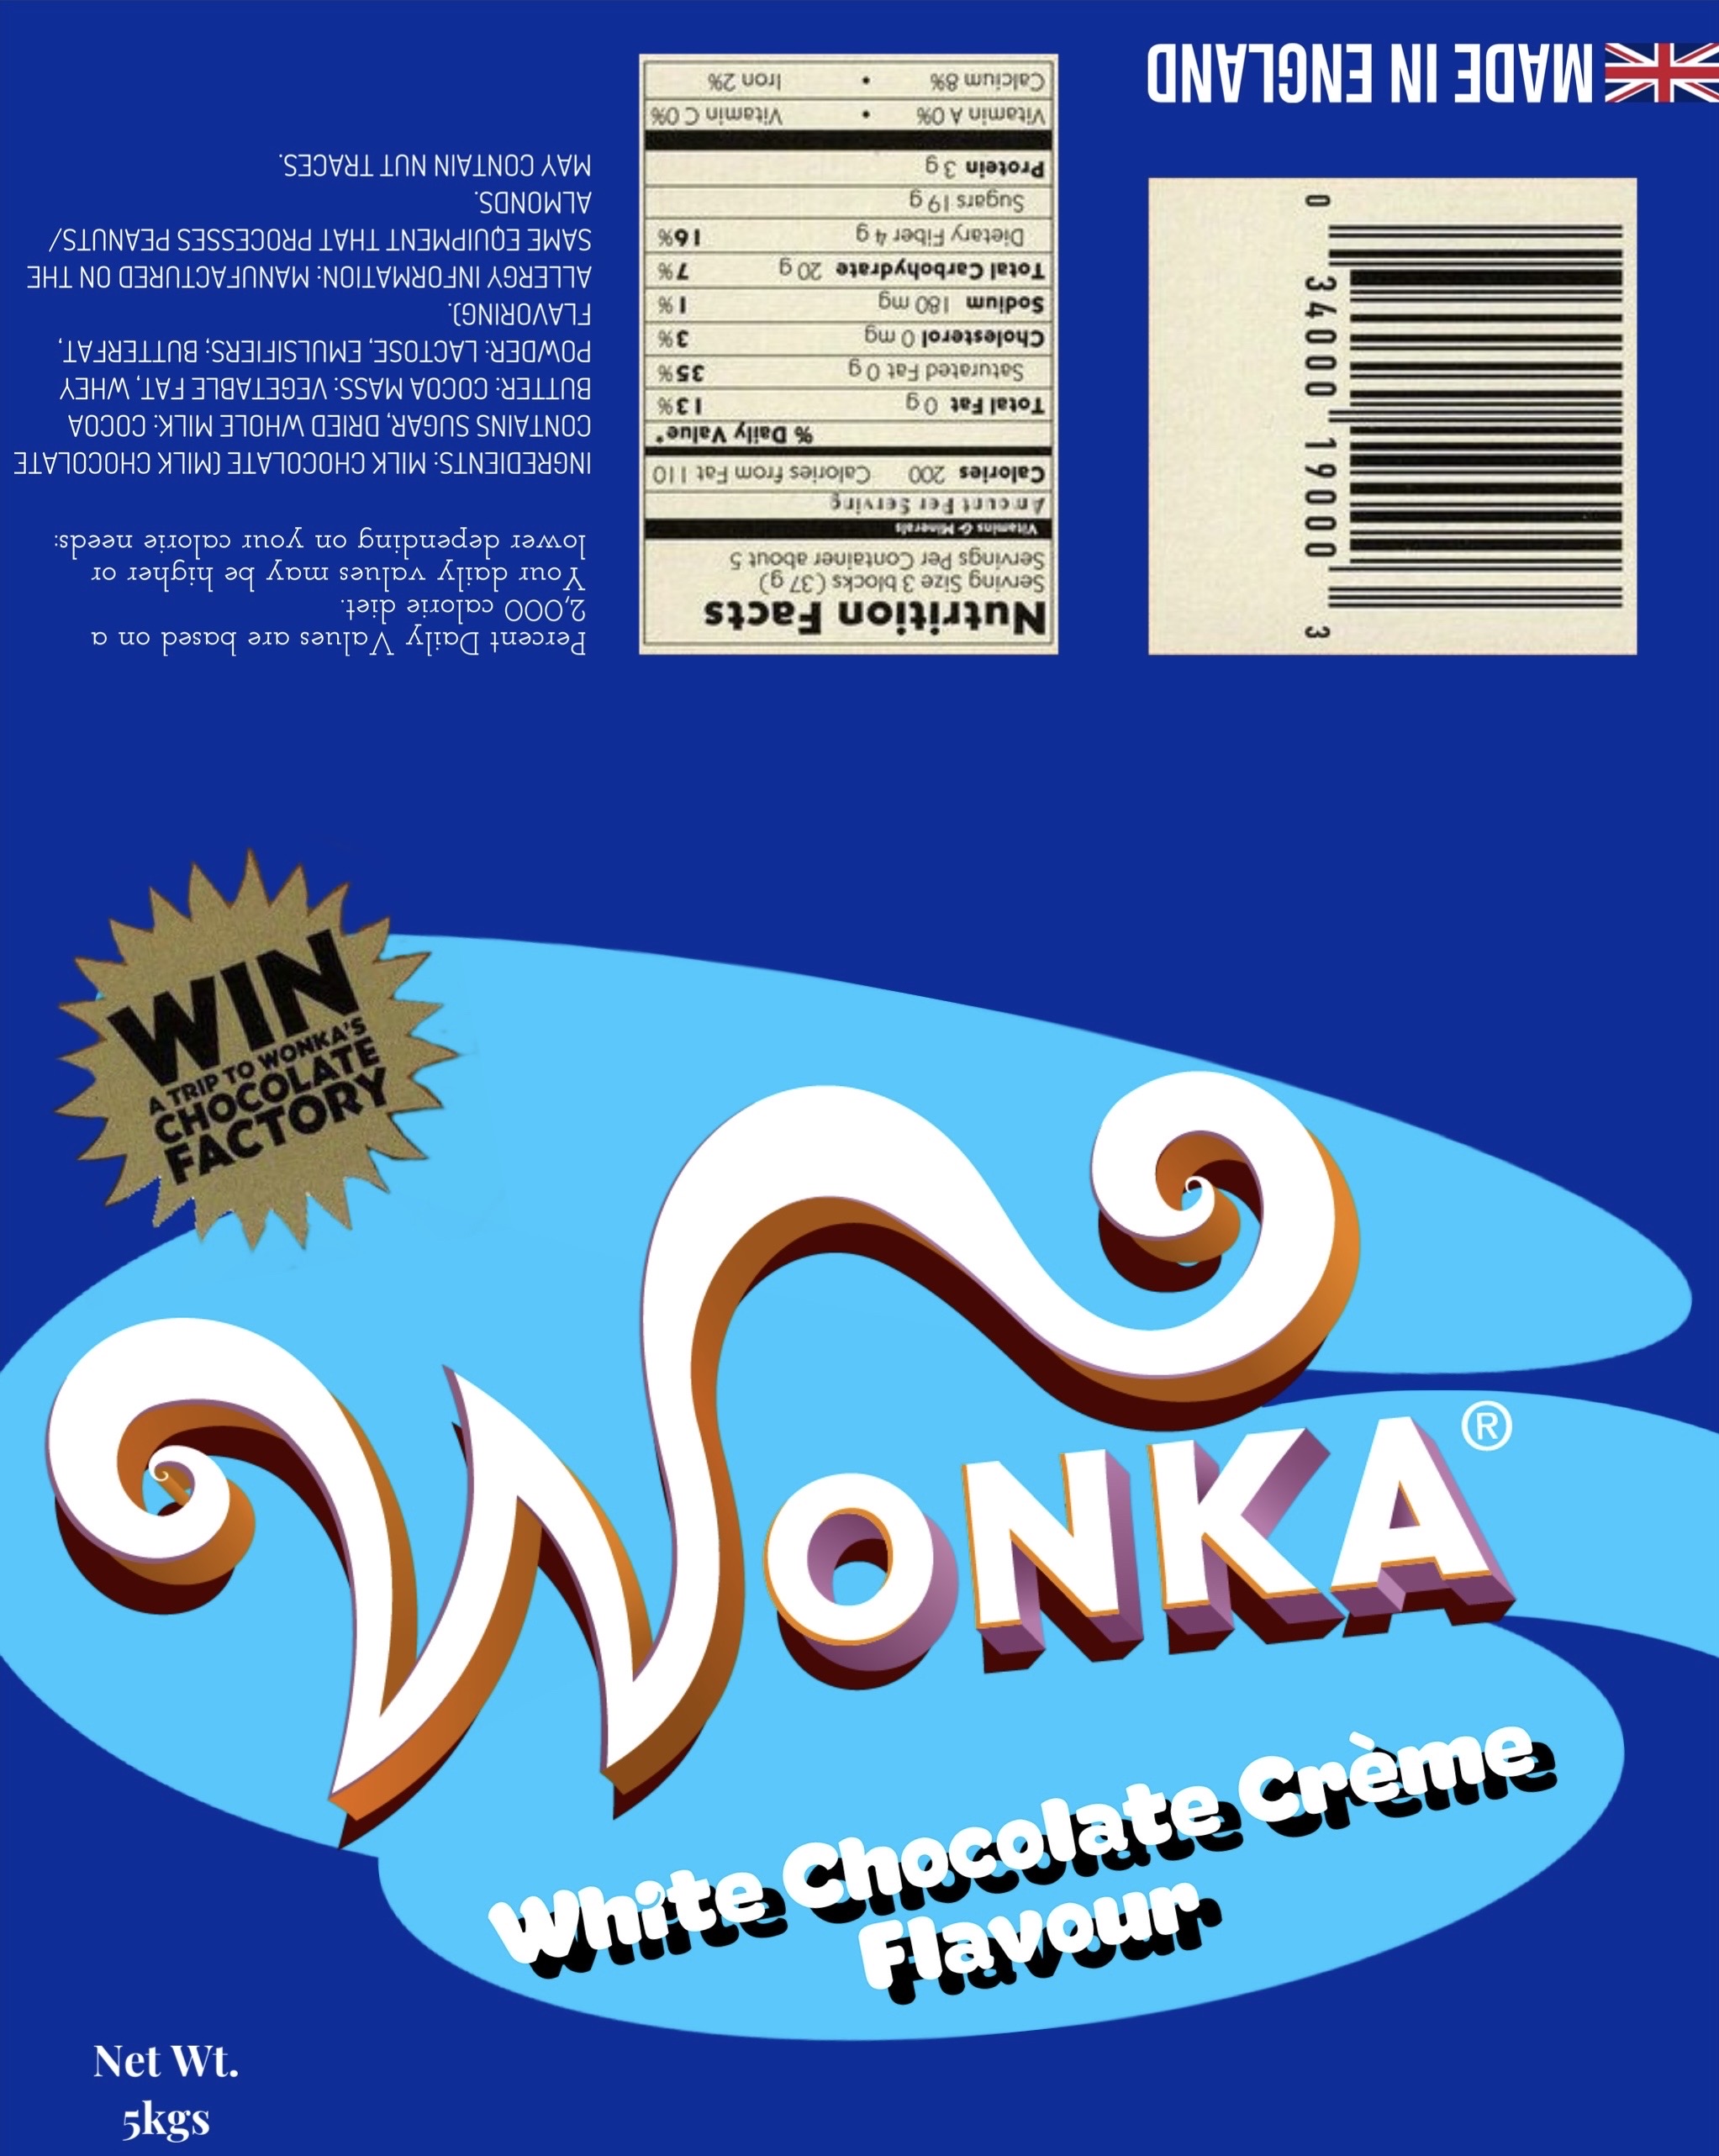 Wonka Charlie and the Chocolate Factory Chocolate Bar Wrapper